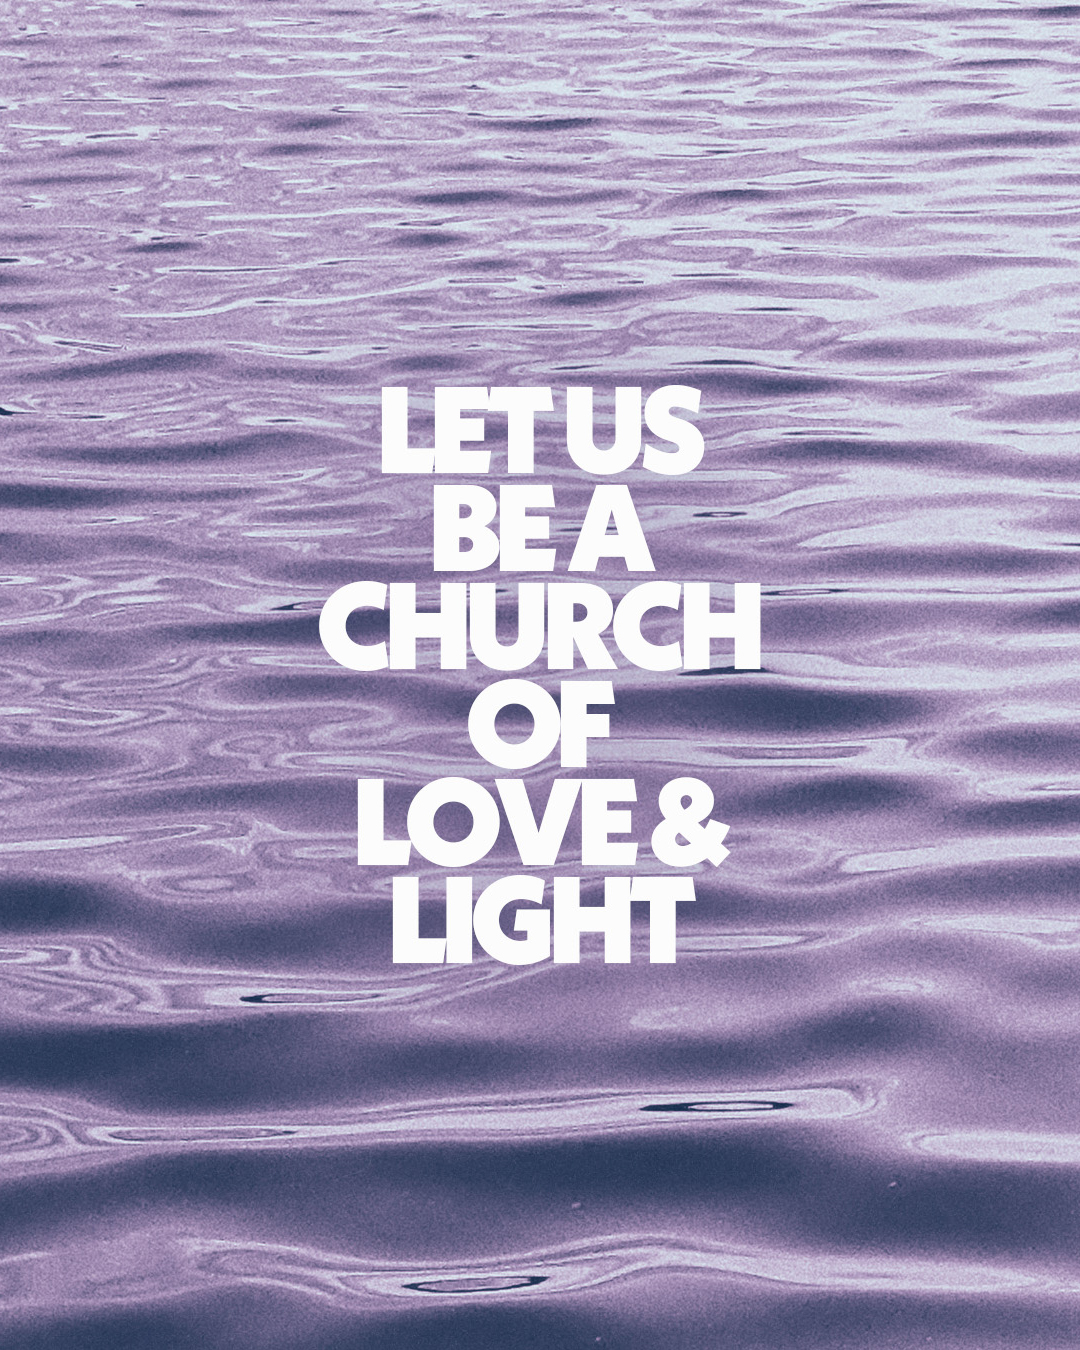 Let us be a church of love & light